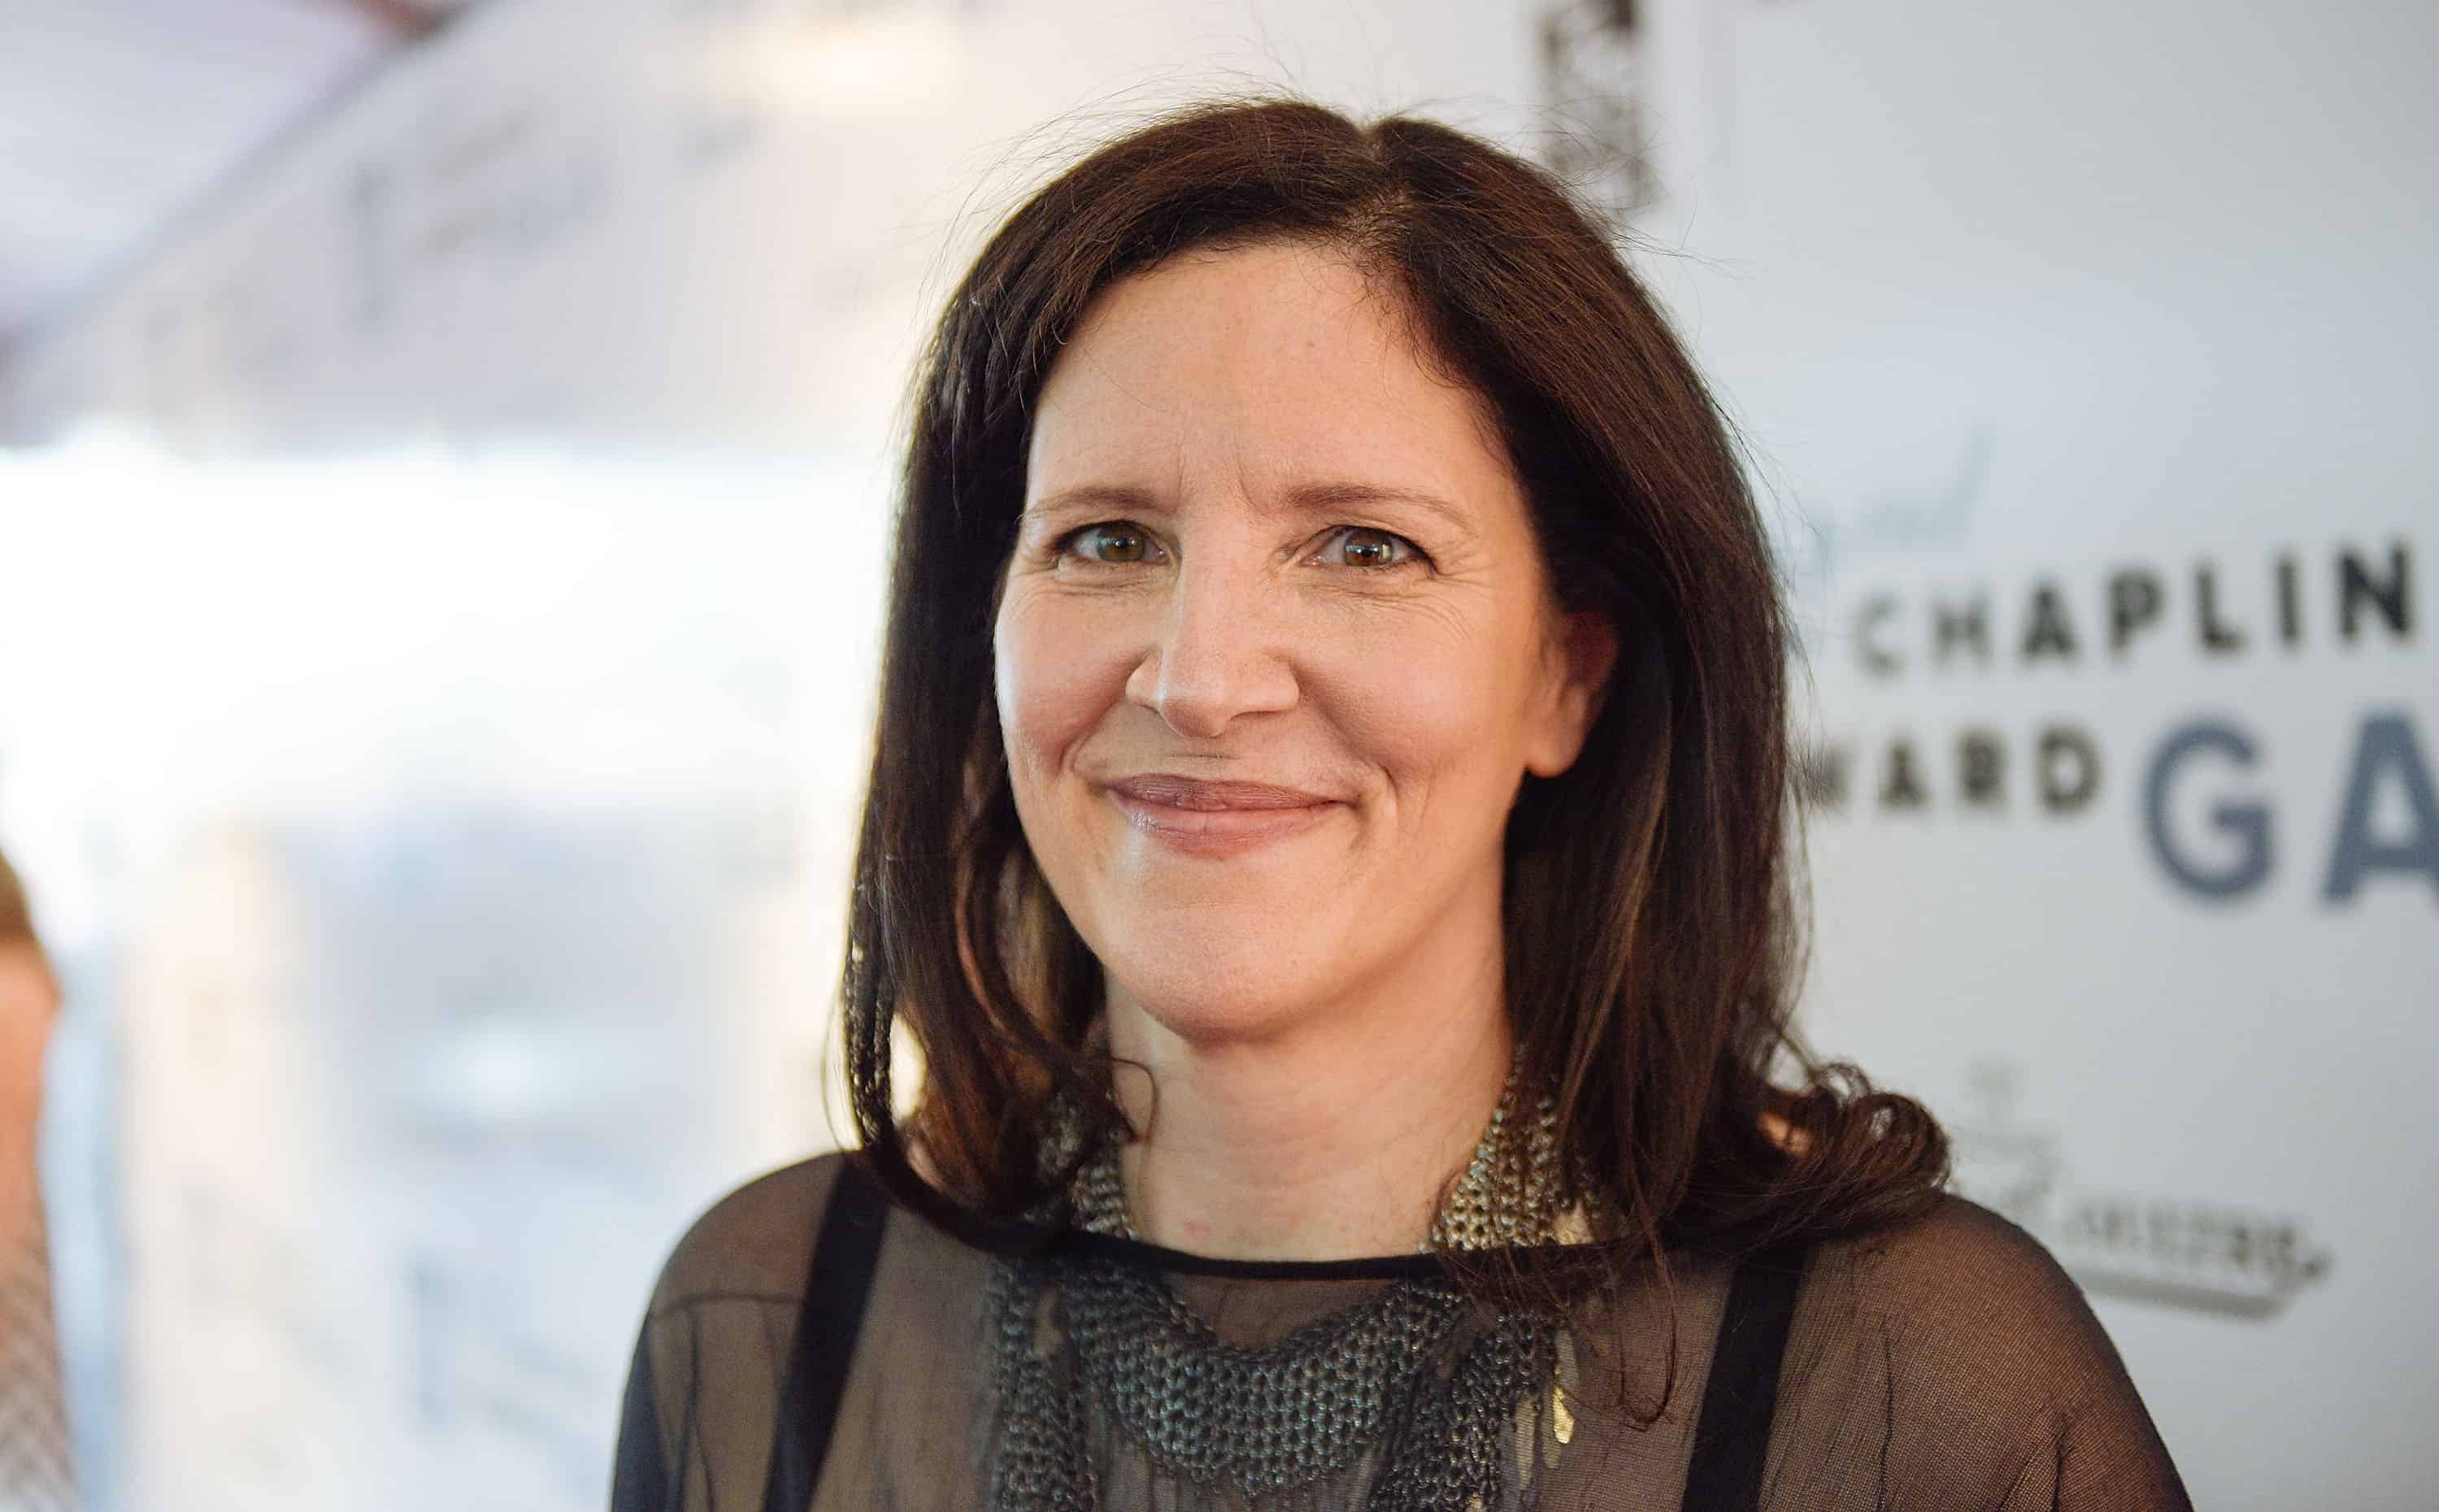 Laura Poitras at the 42nd Chaplin Award Gala at Alice Tully Hall, Lincoln Center on April 27, 2015 in New York City.